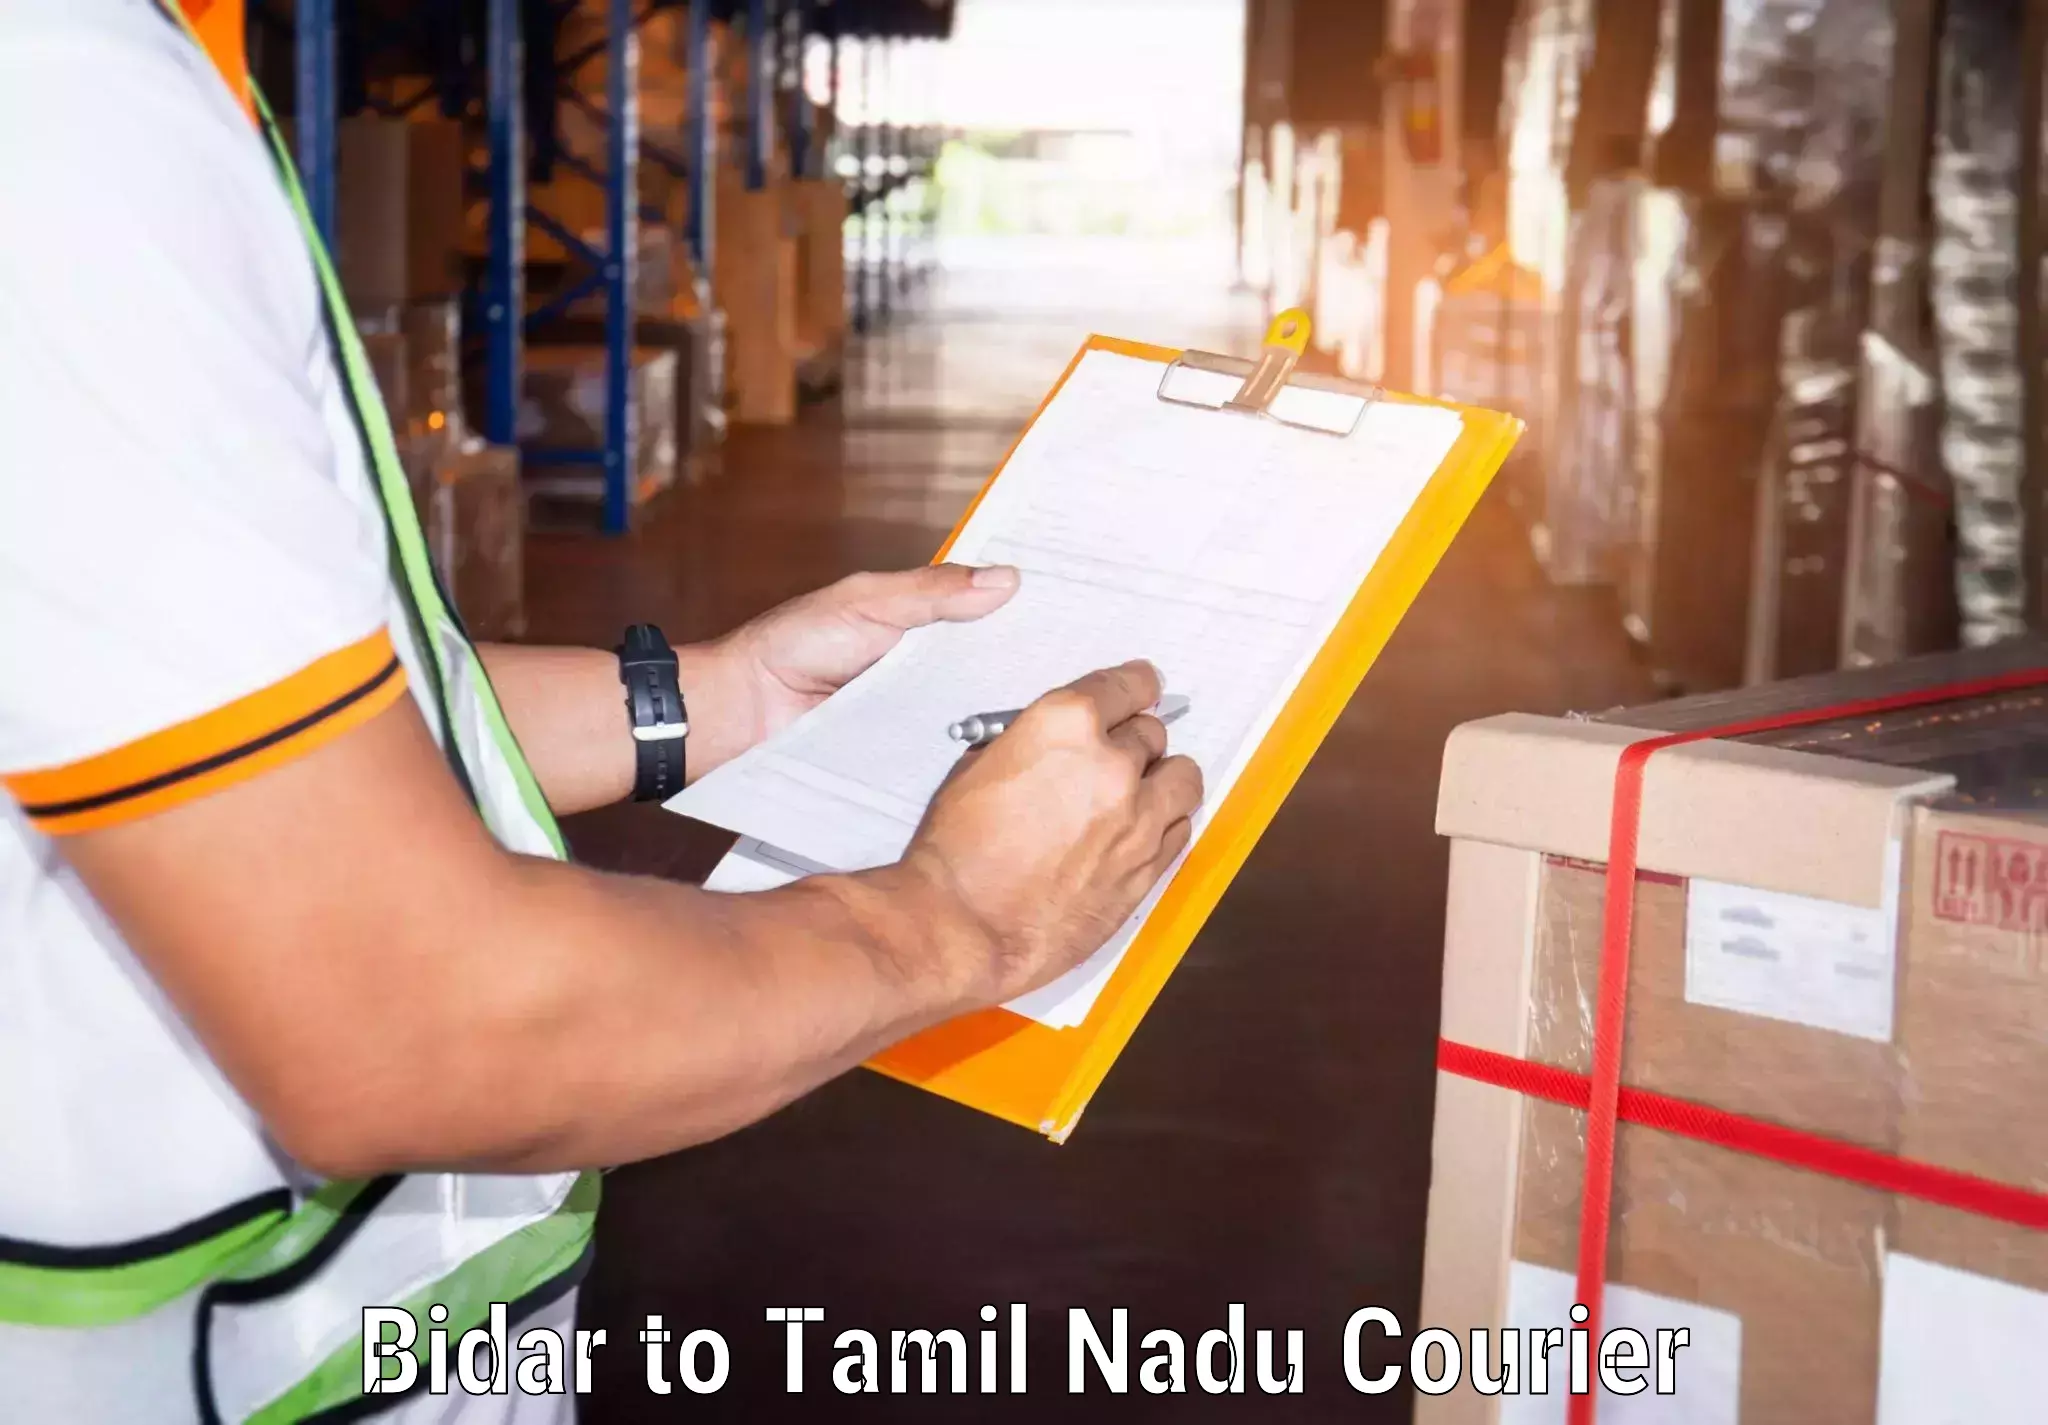 Cost-effective courier options Bidar to Meenakshi Academy of Higher Education and Research Chennai